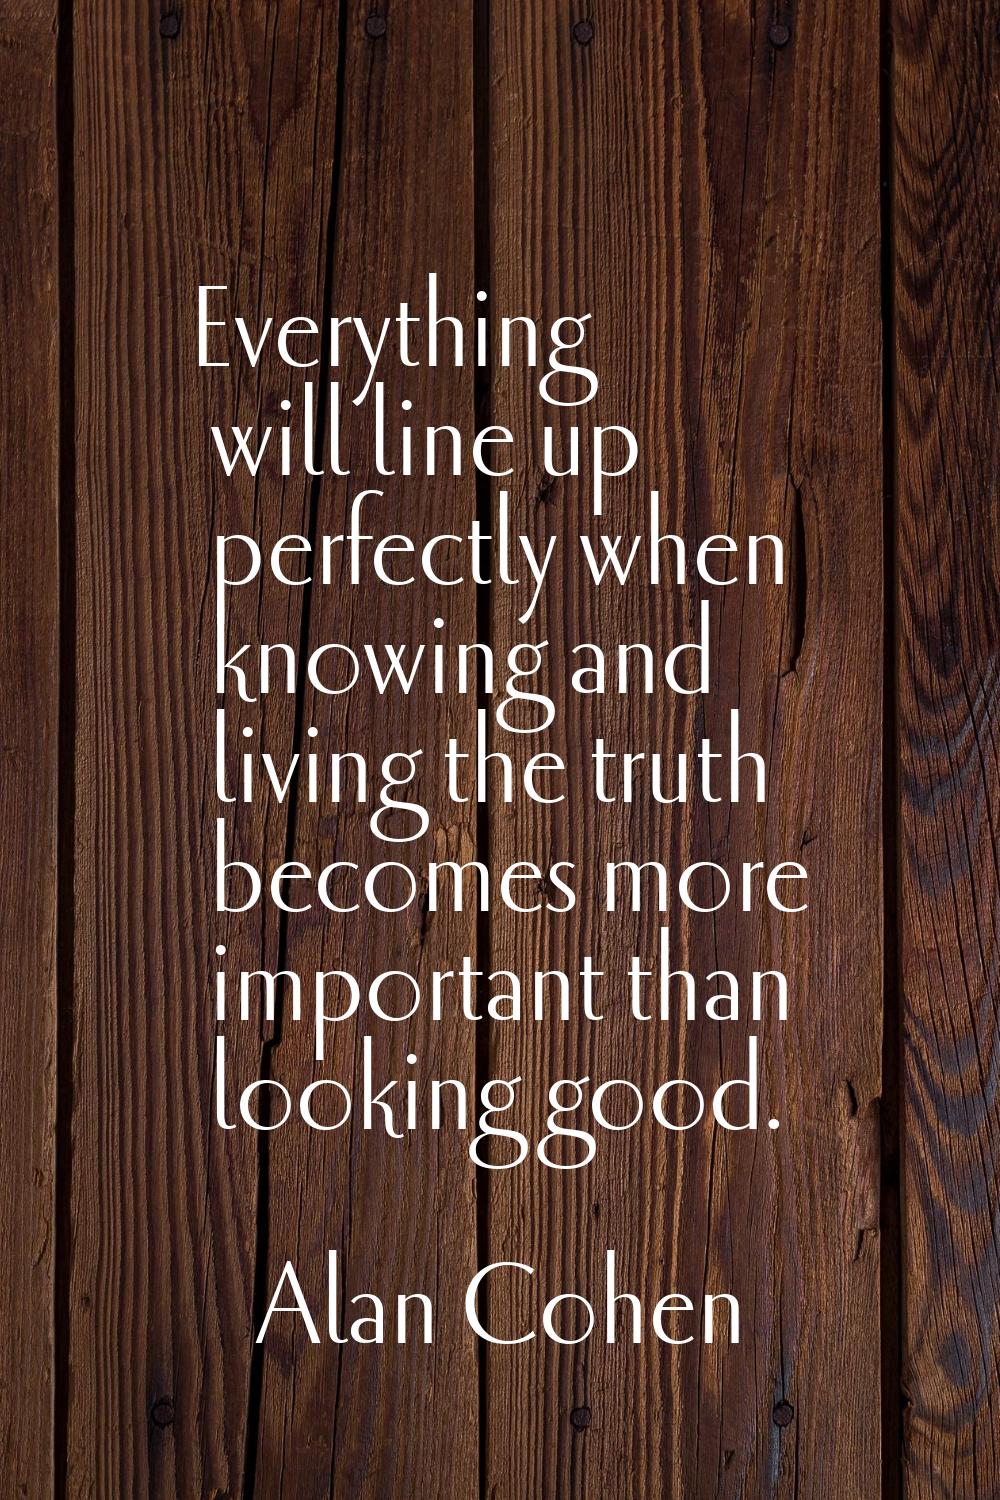 Everything will line up perfectly when knowing and living the truth becomes more important than loo